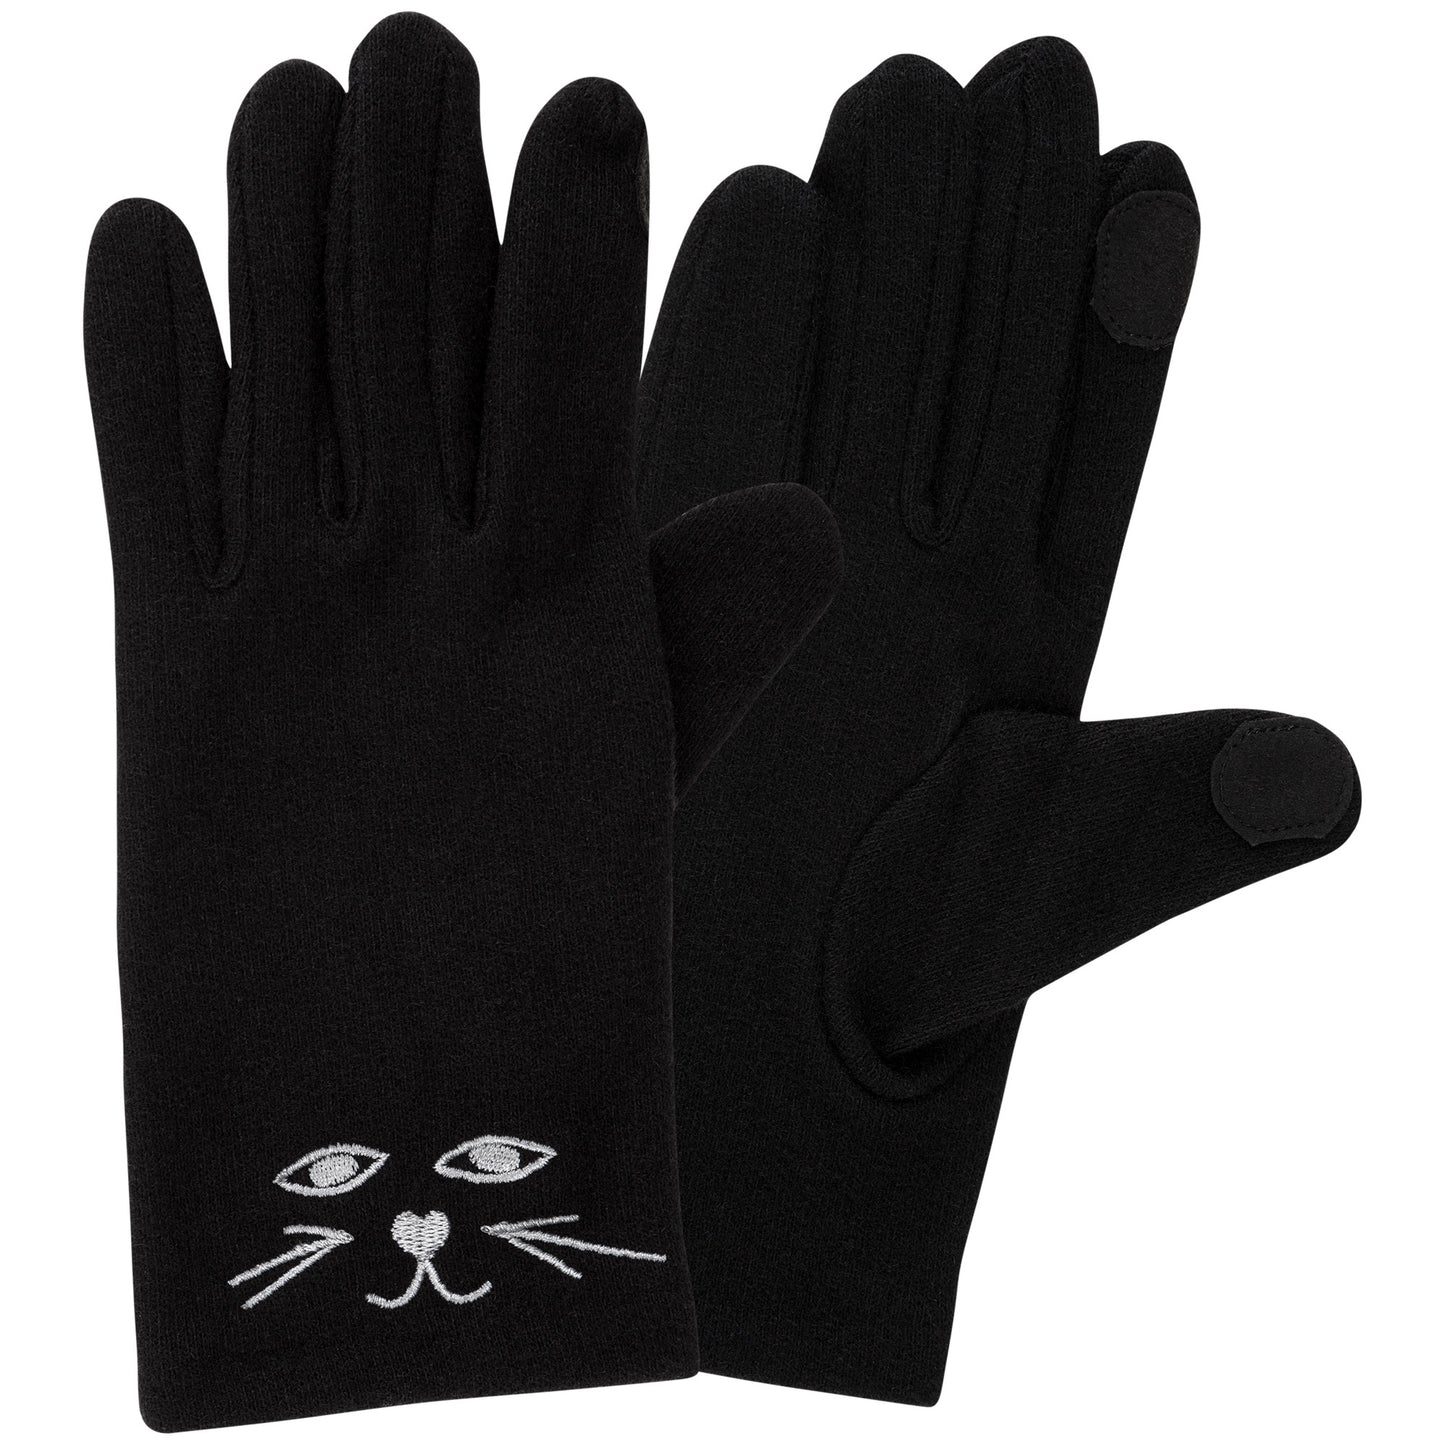 My Companion Touch Screen Gloves